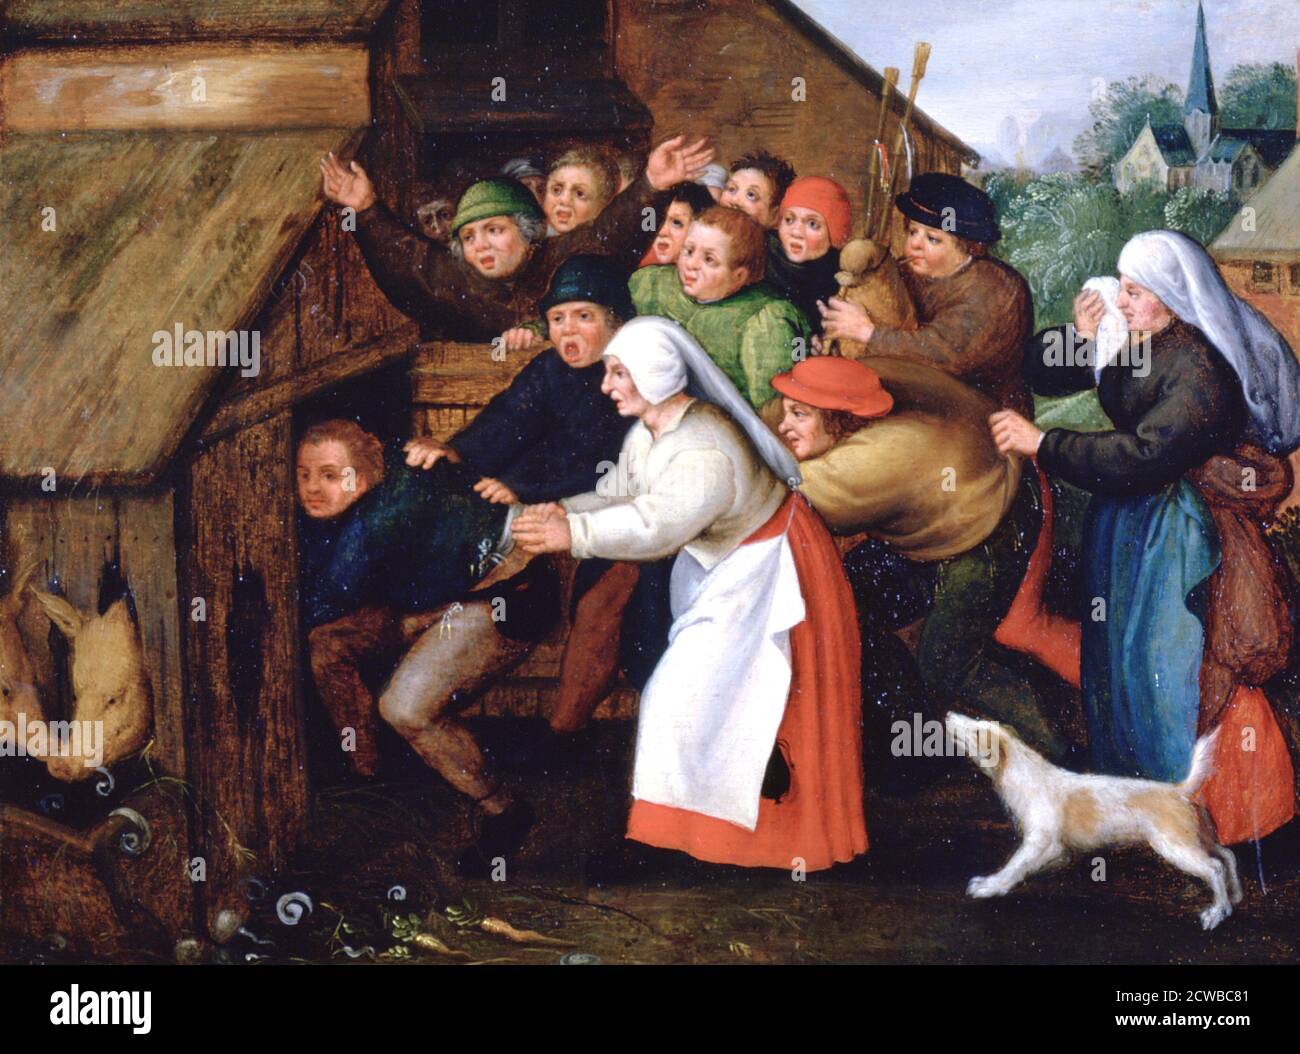 Painting by Pieter Brueghel the Younger titled 'The Drunkard Pushed into the Pigsty', 1564-1638. Part of a private collection. Stock Photo